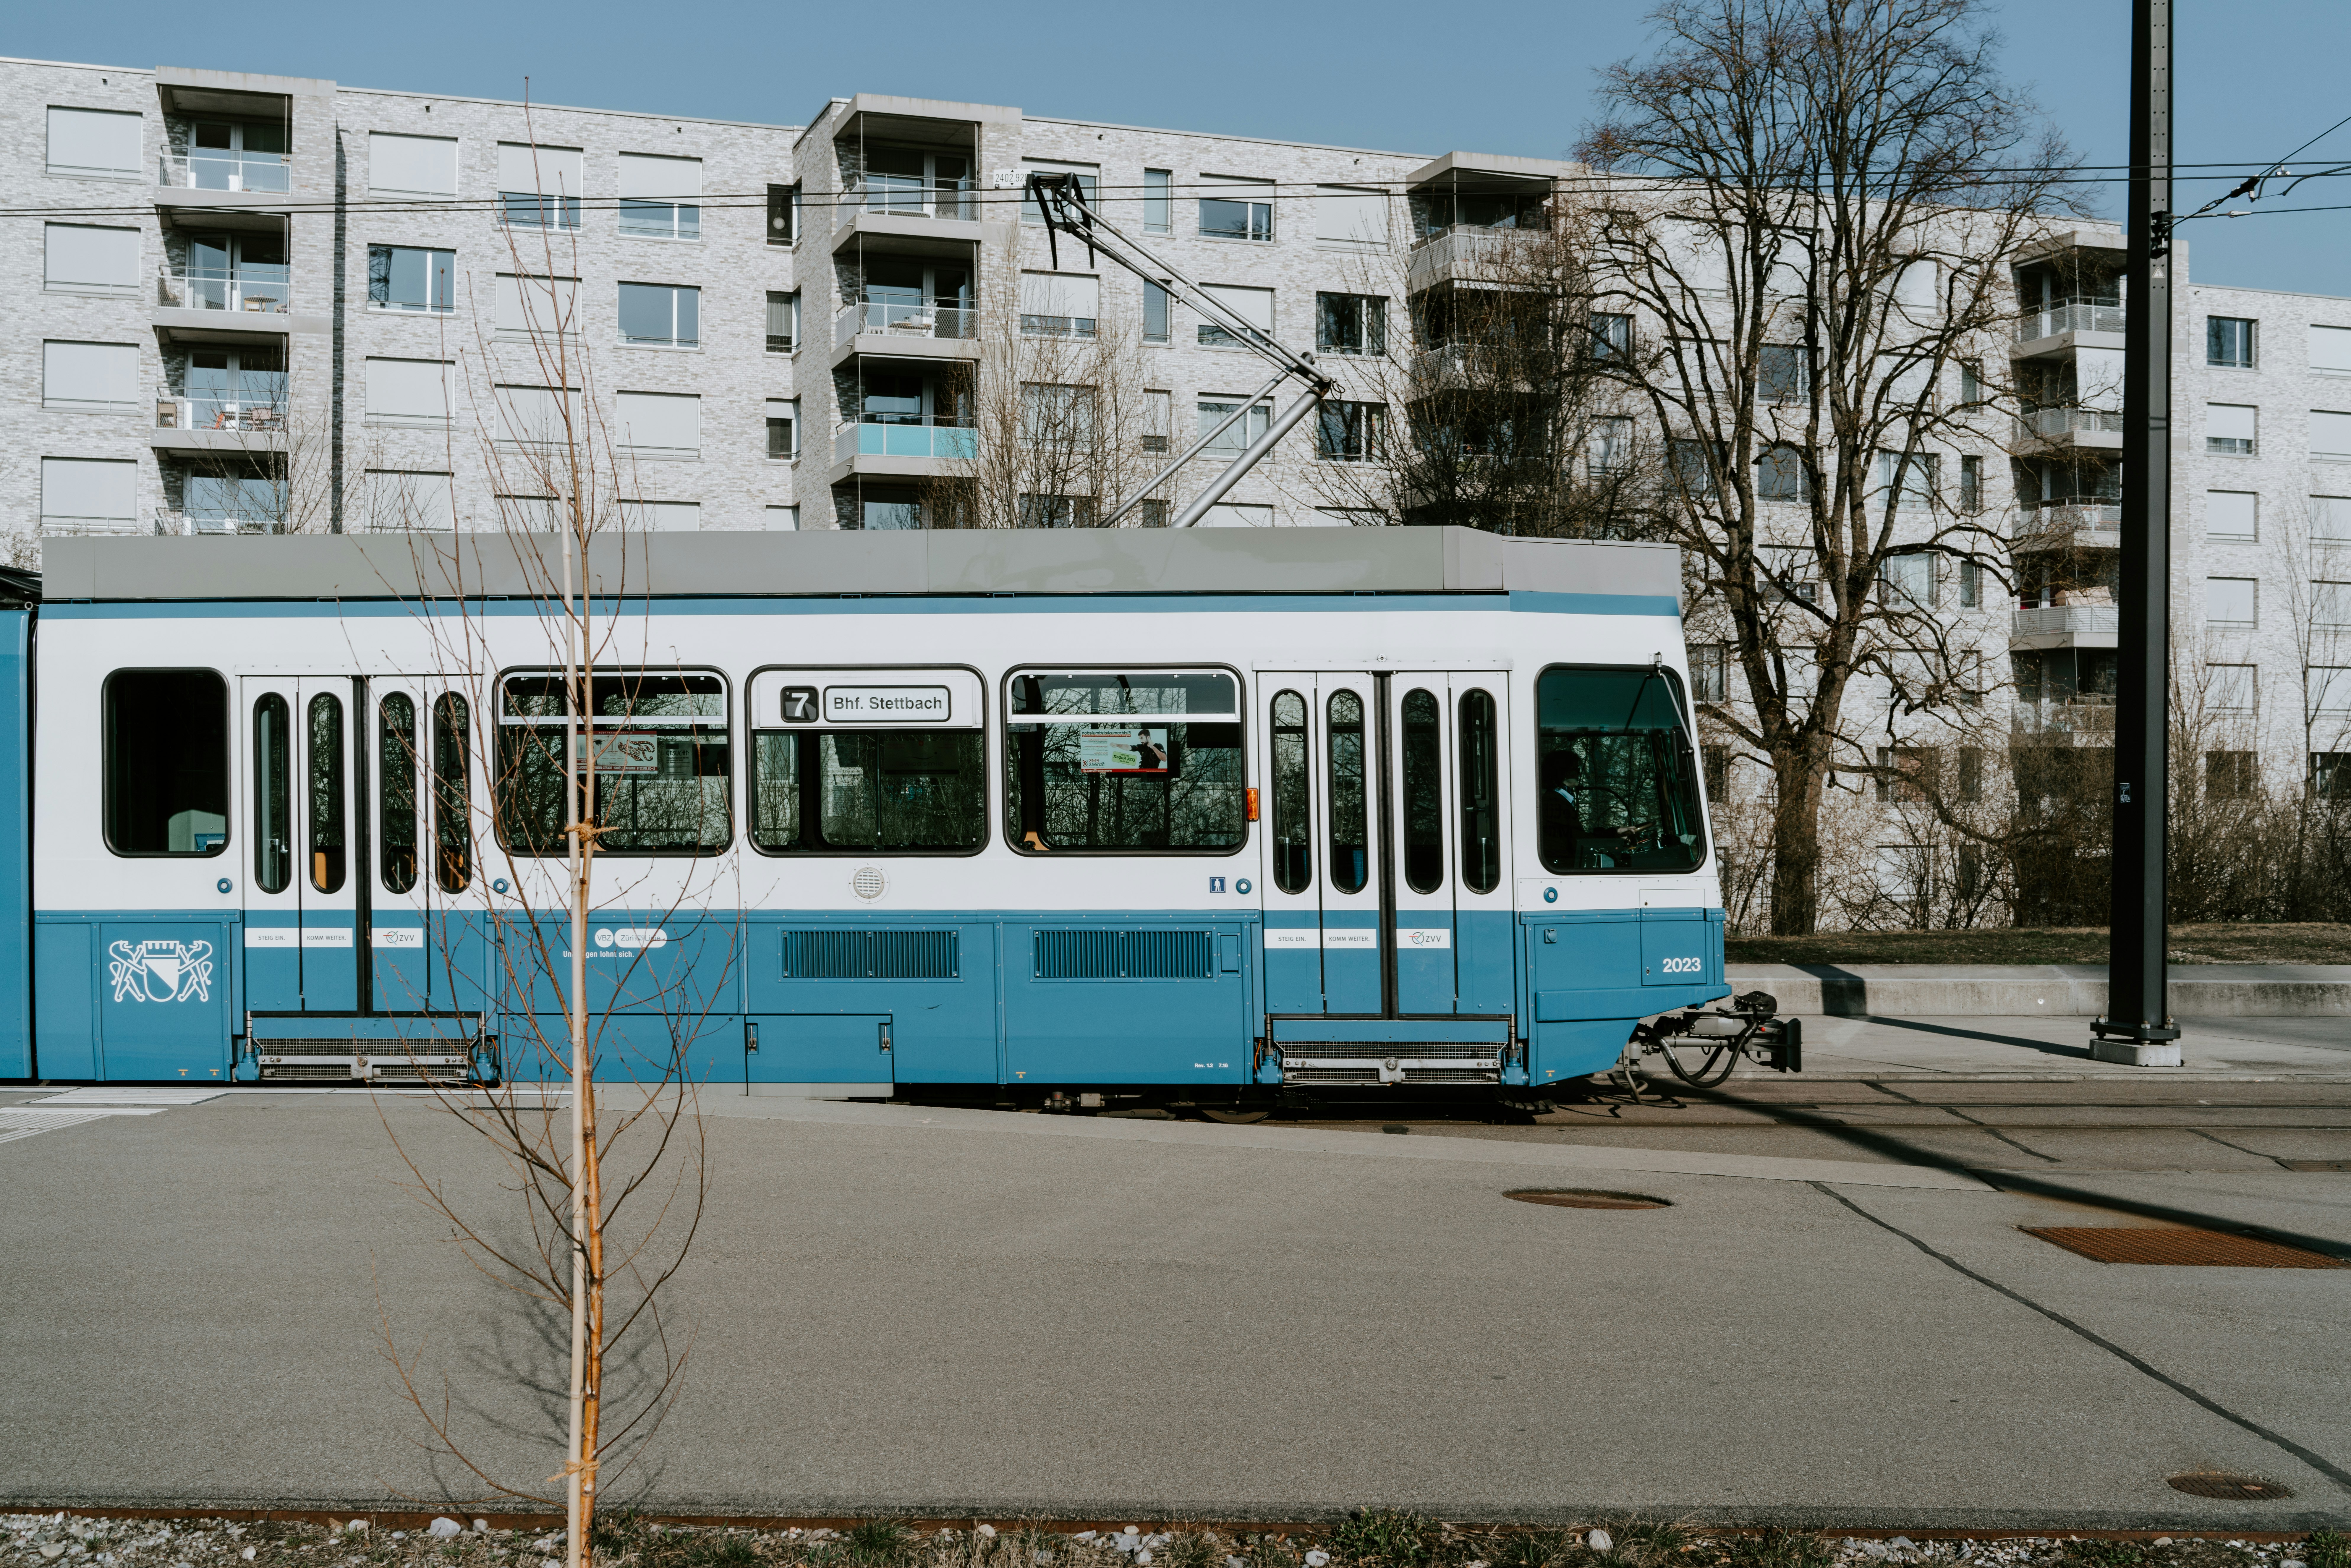 blue and white tram beside gray concrete multi-story building during daytime